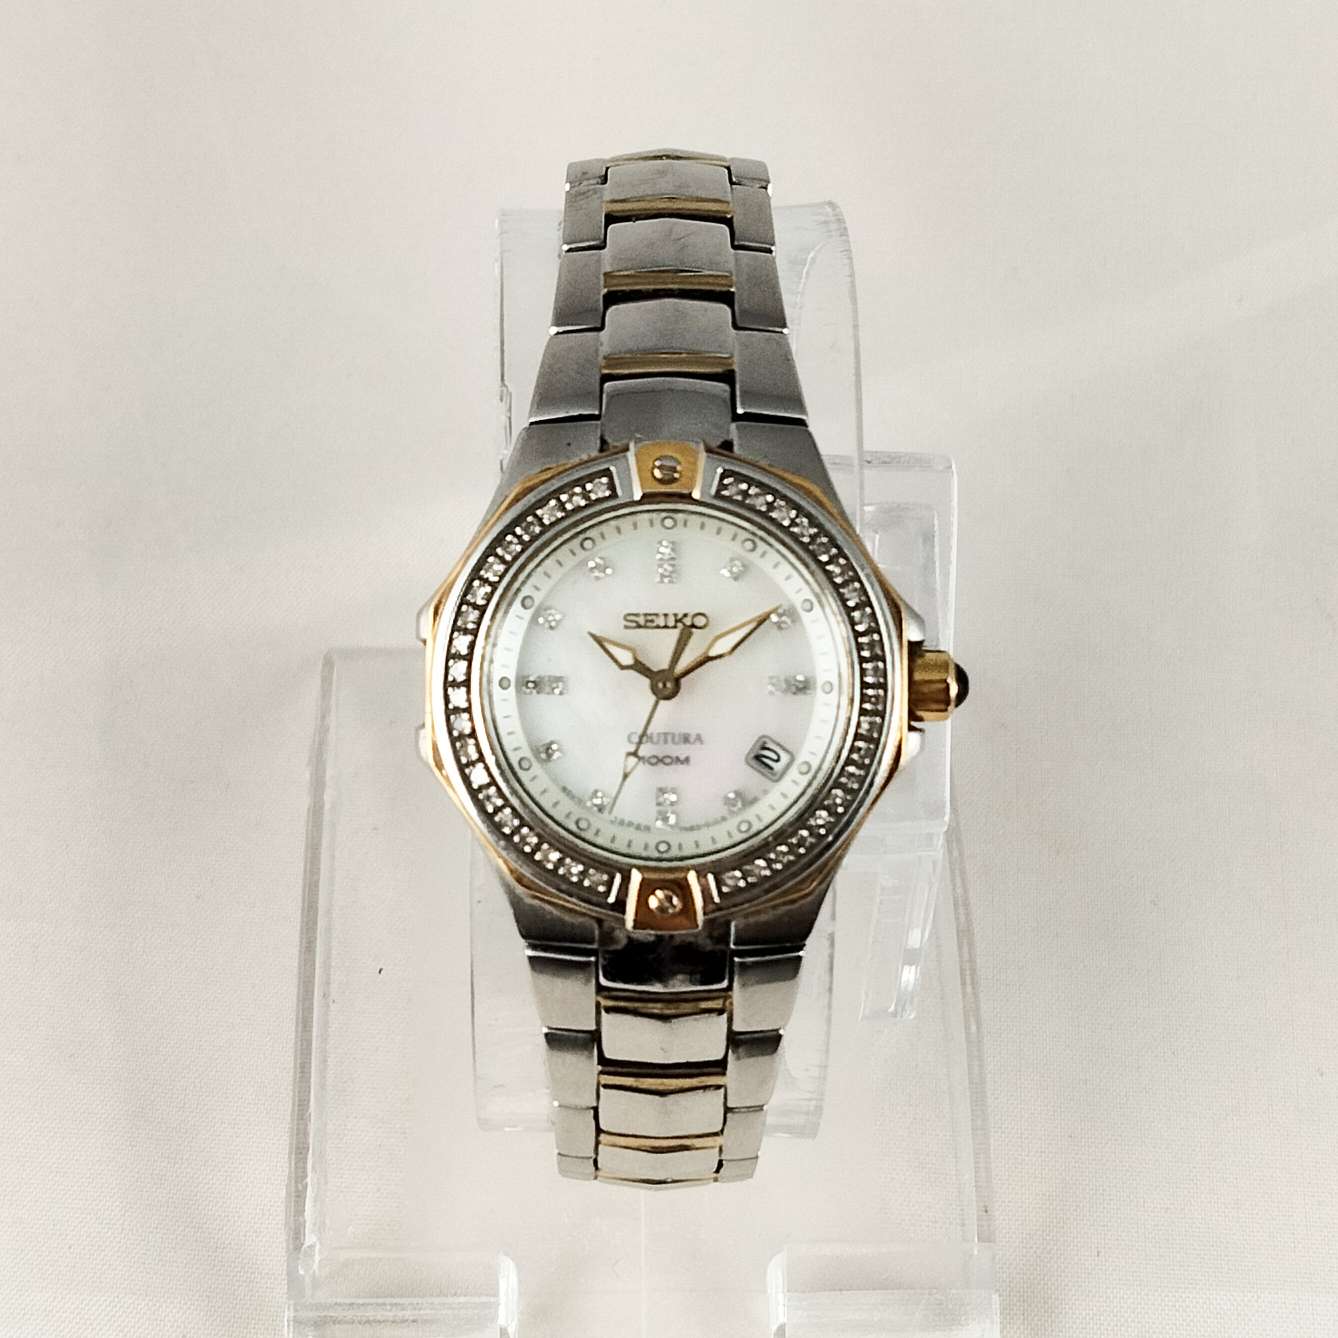 Seiko Coutura Watch, Mother of Pearl Dial, Jewel Details, Bracelet Strap